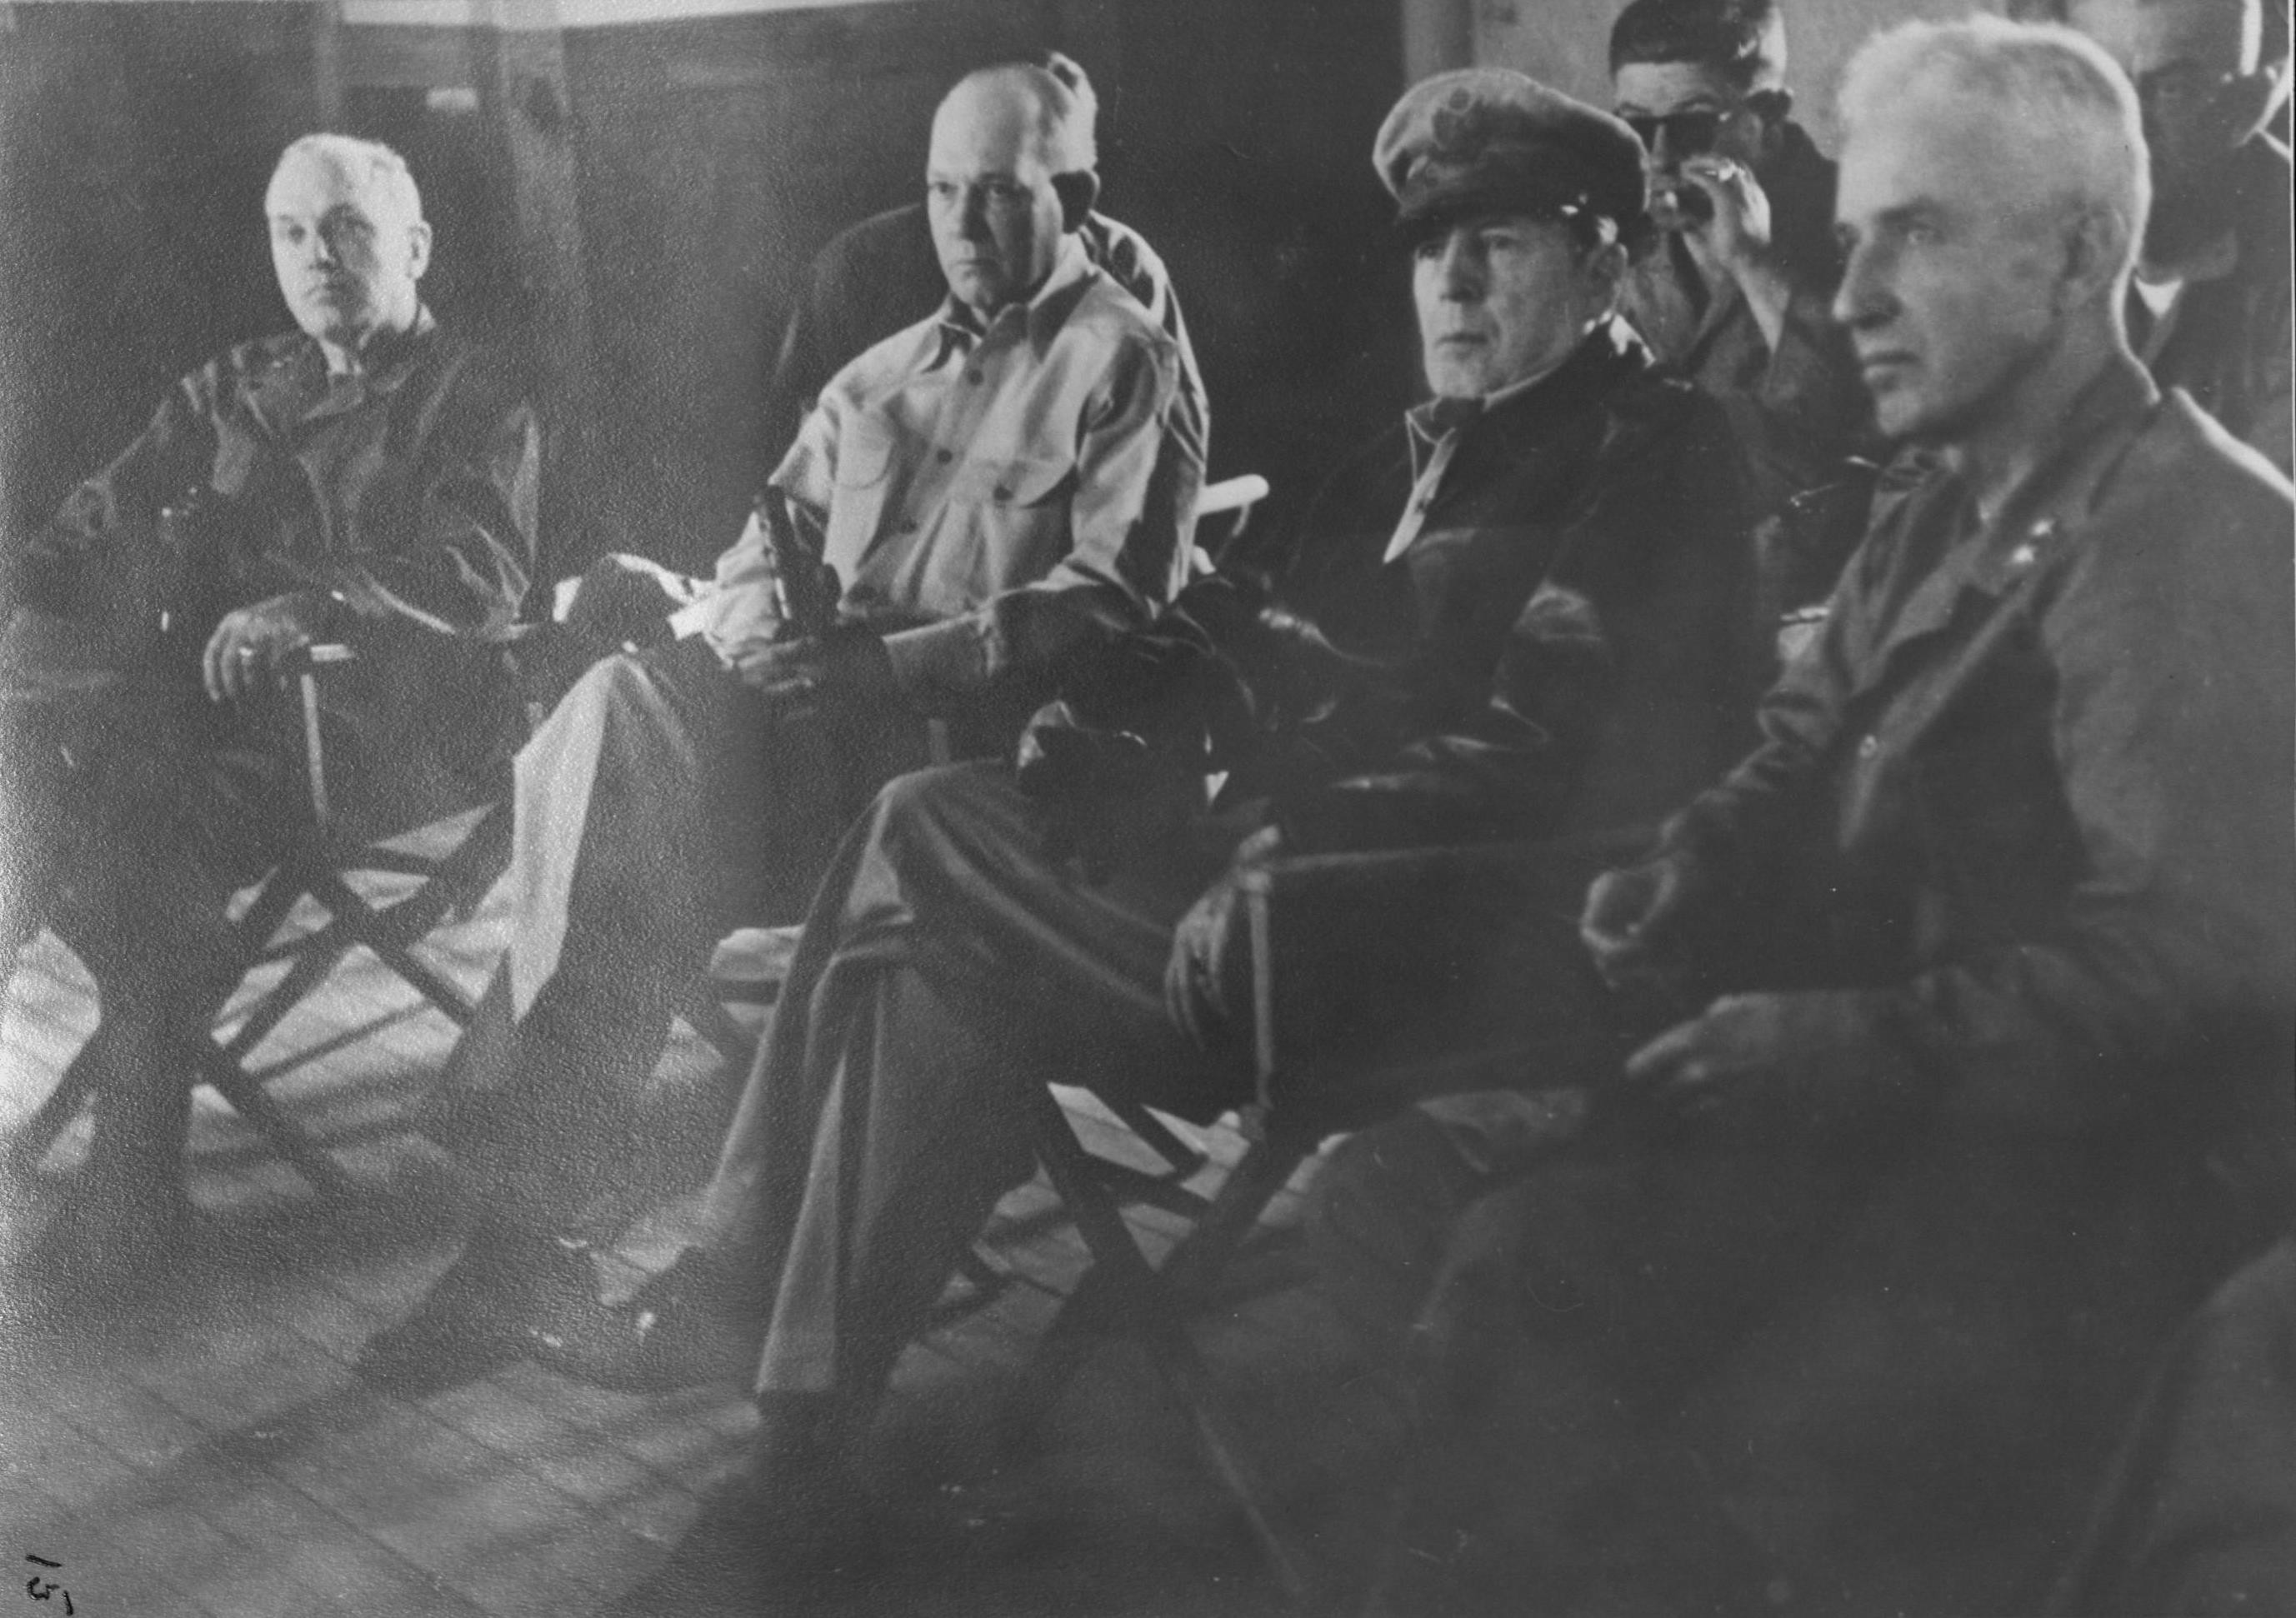 General Edward Almond, General Lemuel Shepherd, General Douglas MacArthur, General Oliver Smith, and Colonel McAllister at a division command post southeast of Inchon, Korea, 17 Sep 1950